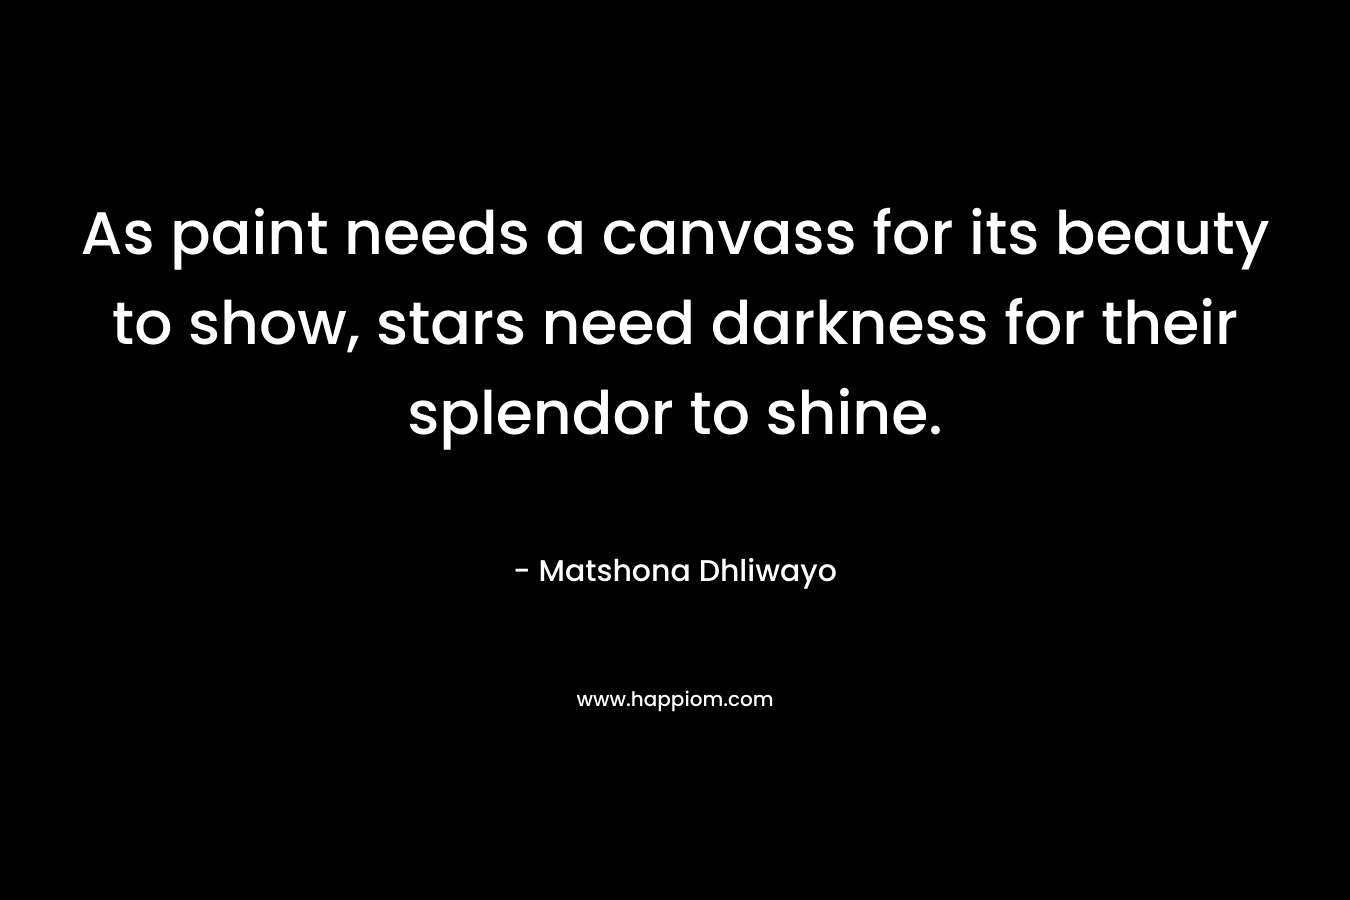 As paint needs a canvass for its beauty to show, stars need darkness for their splendor to shine. – Matshona Dhliwayo